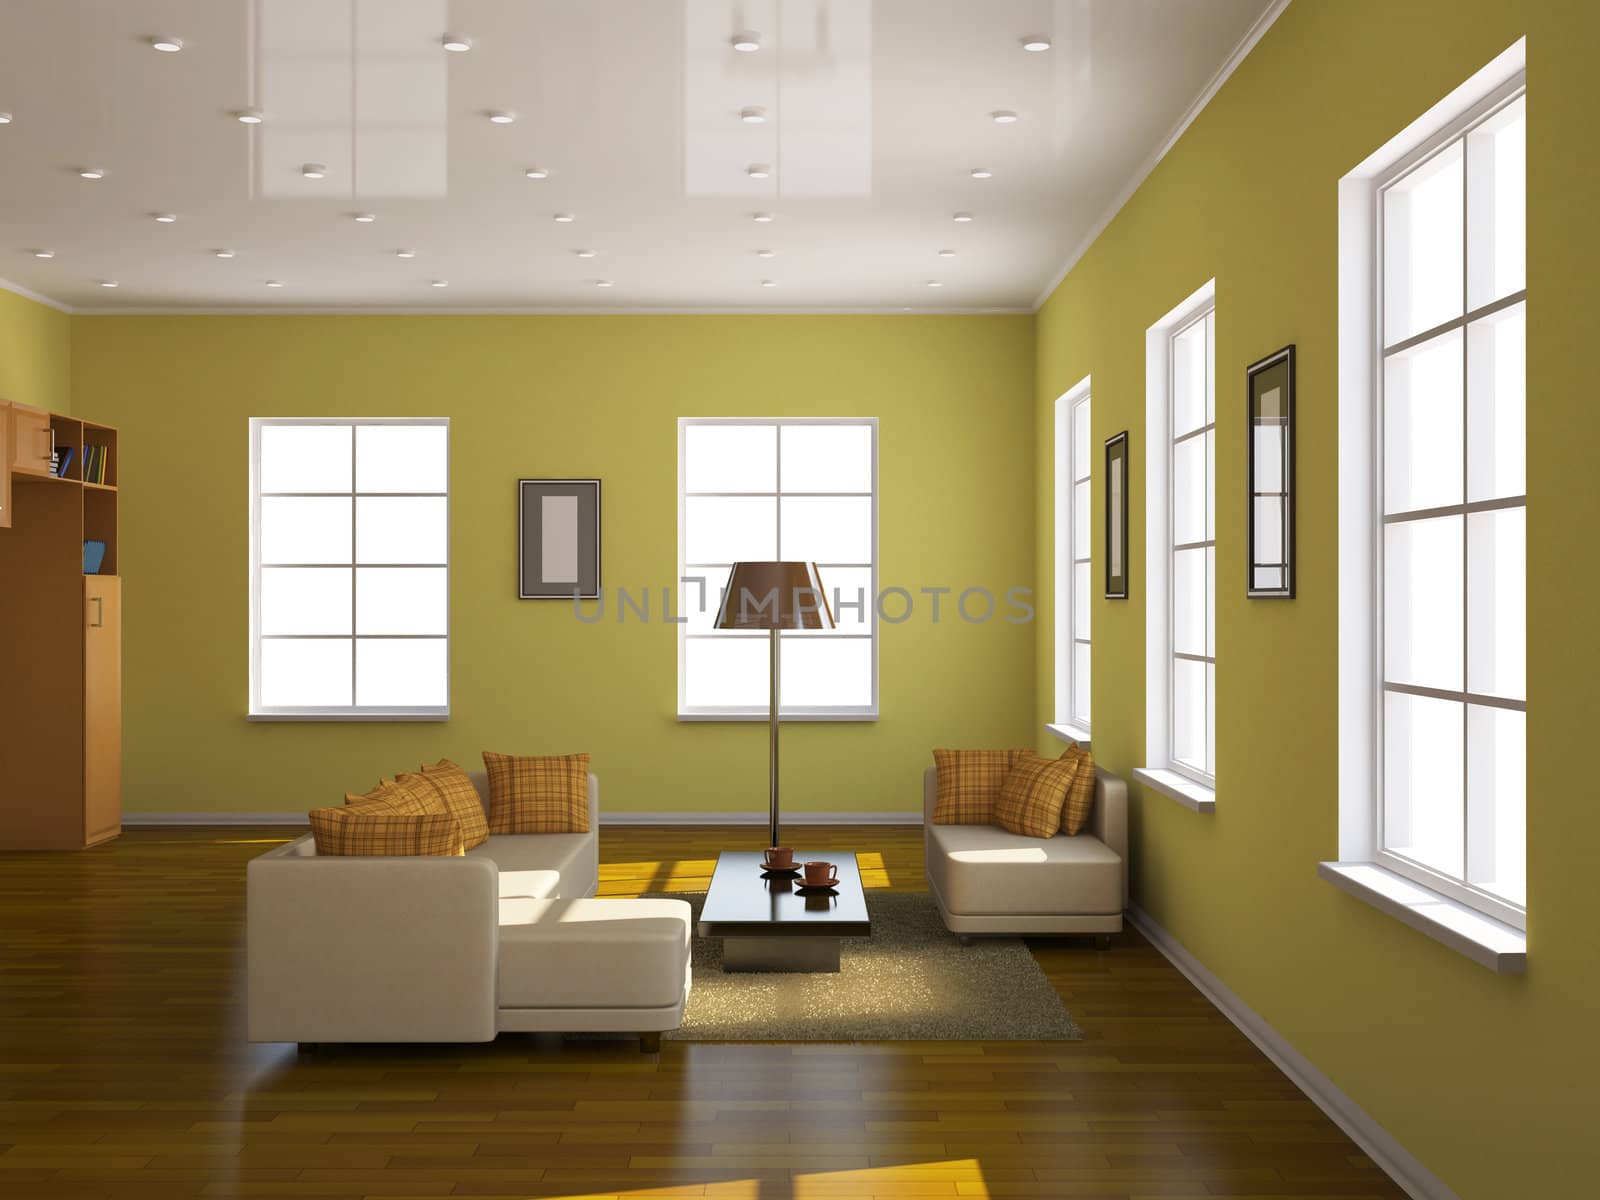 Room interior with a sofa and a table